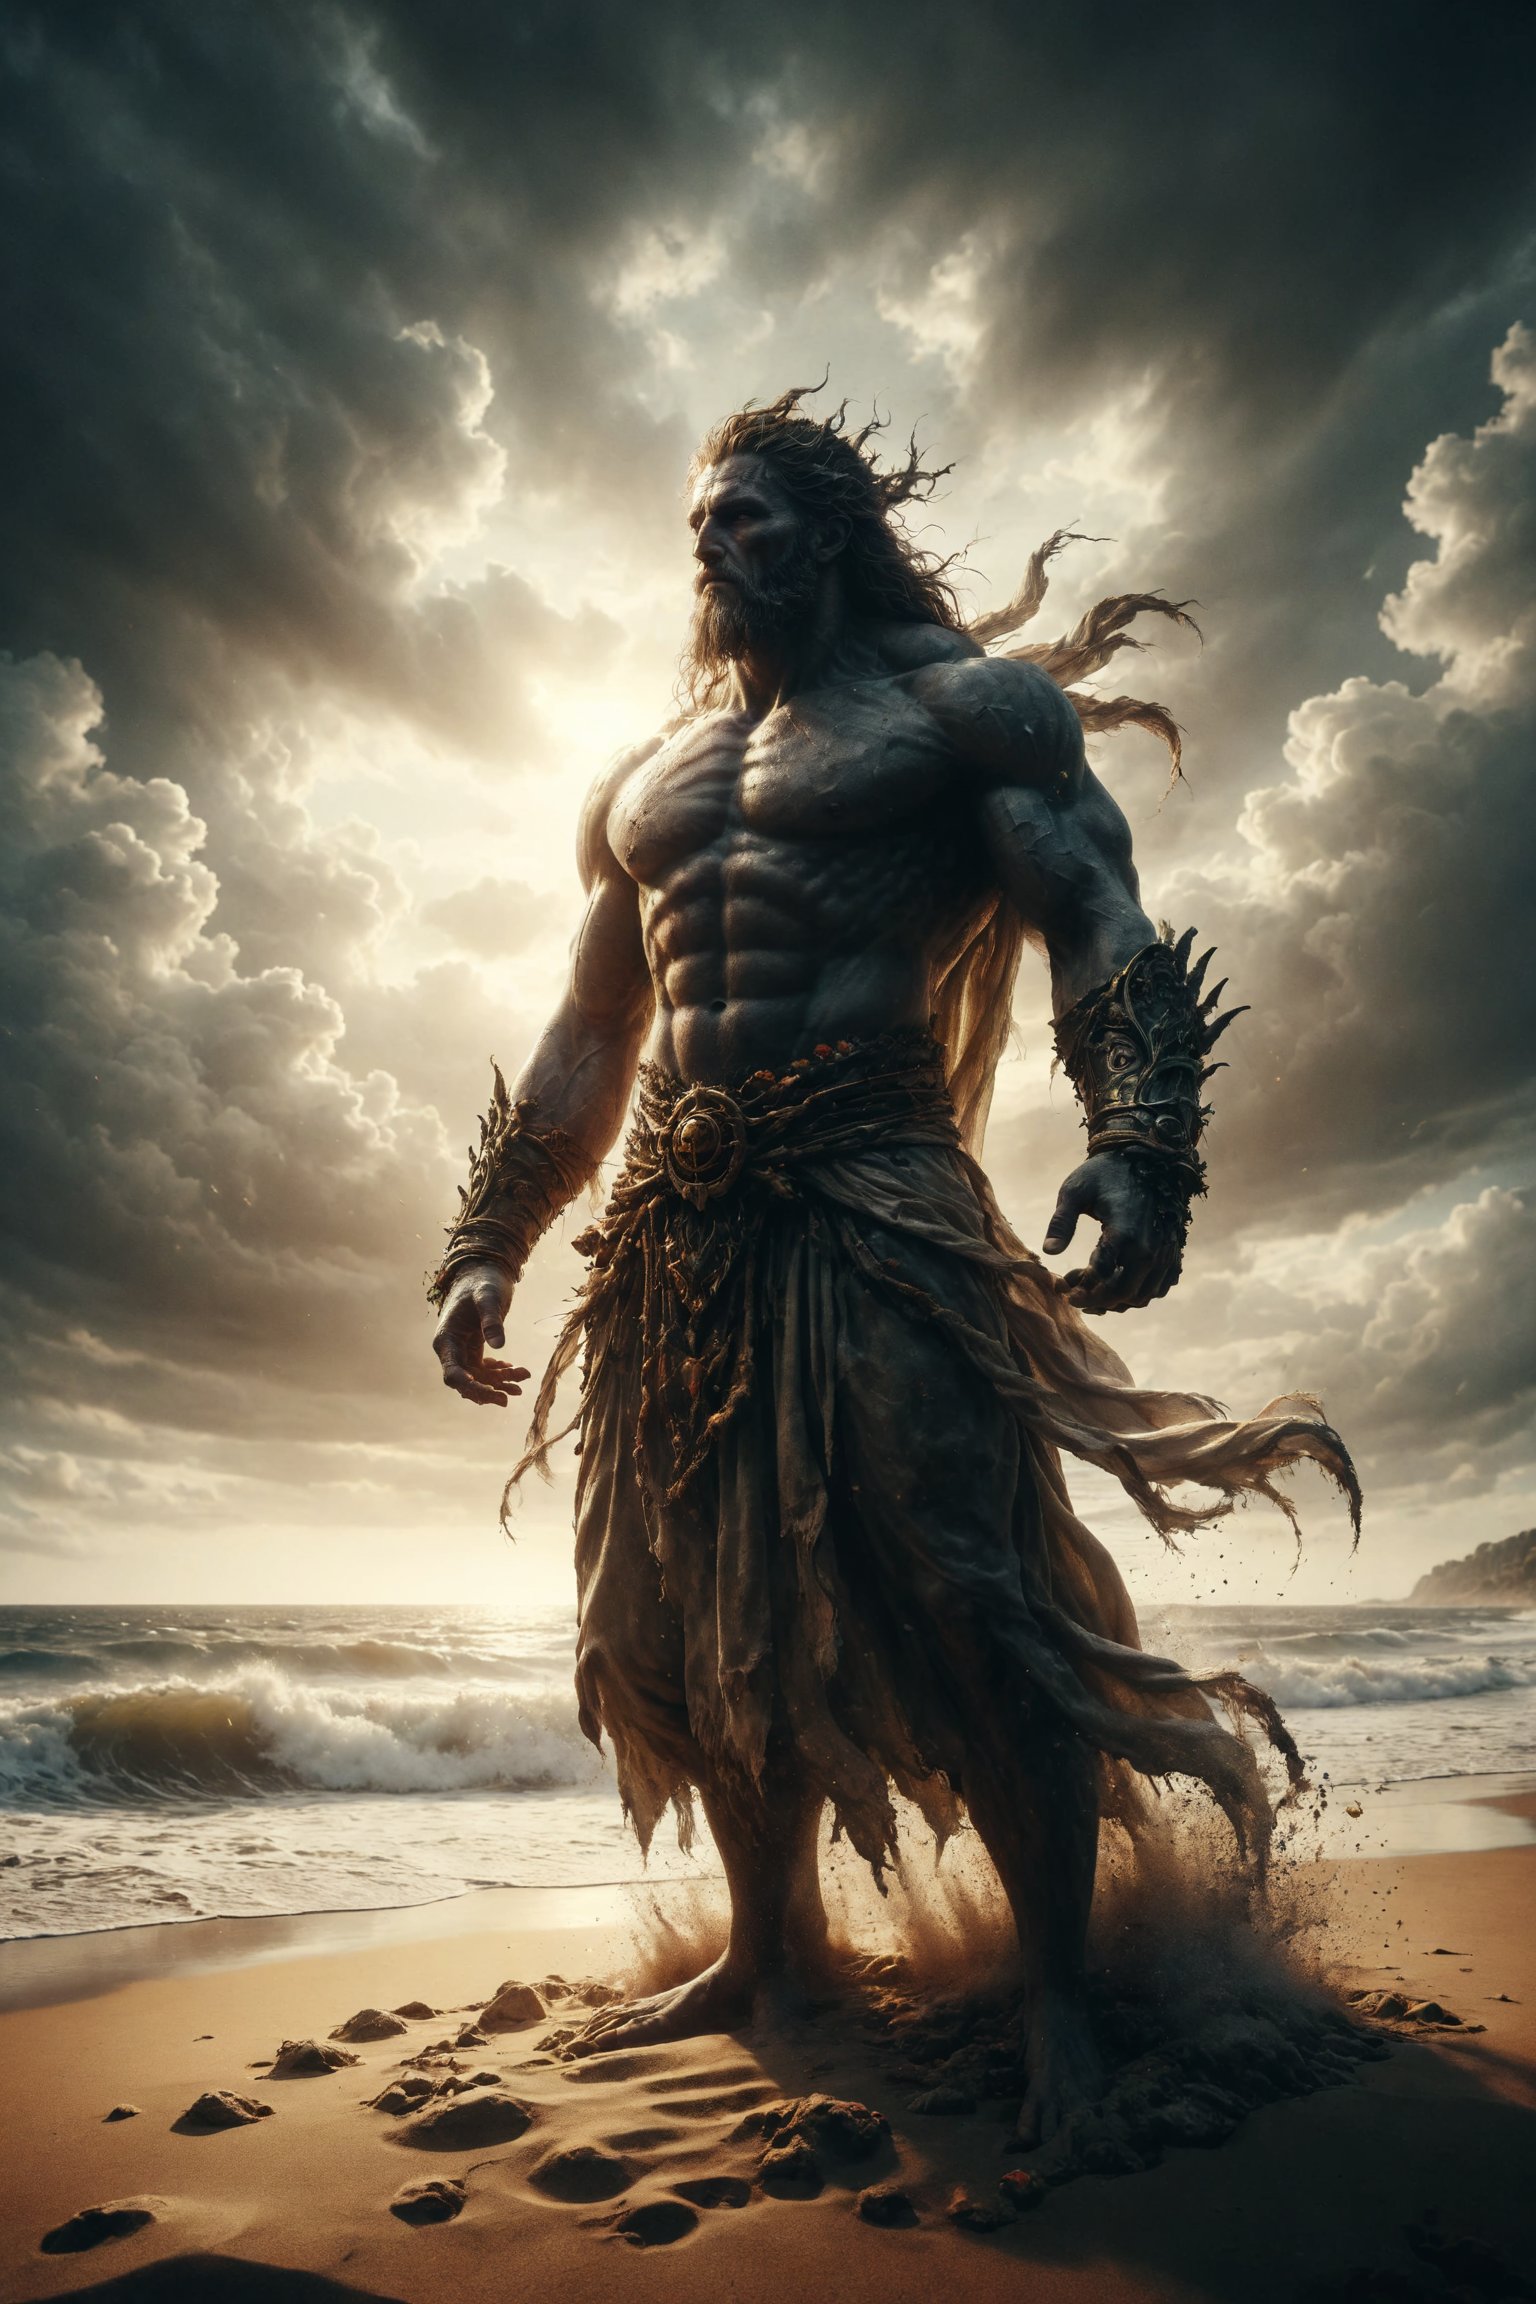  god of  the beachs, epic pose, full body, epic mistic composition